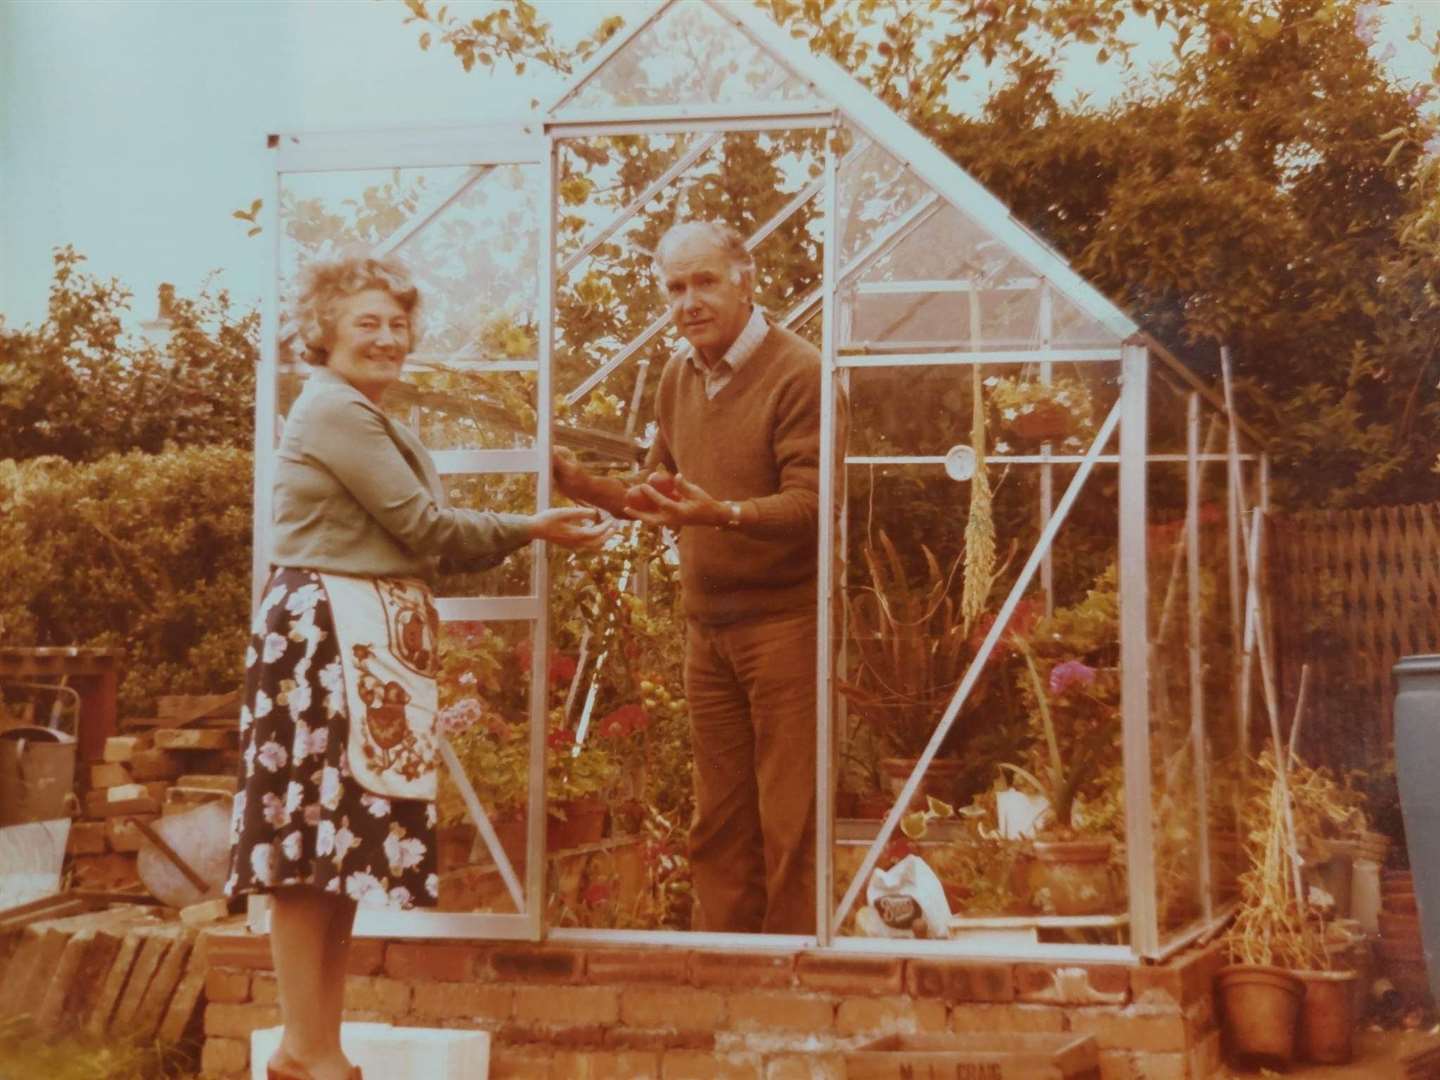 Betty and Frank at their home in Arran.